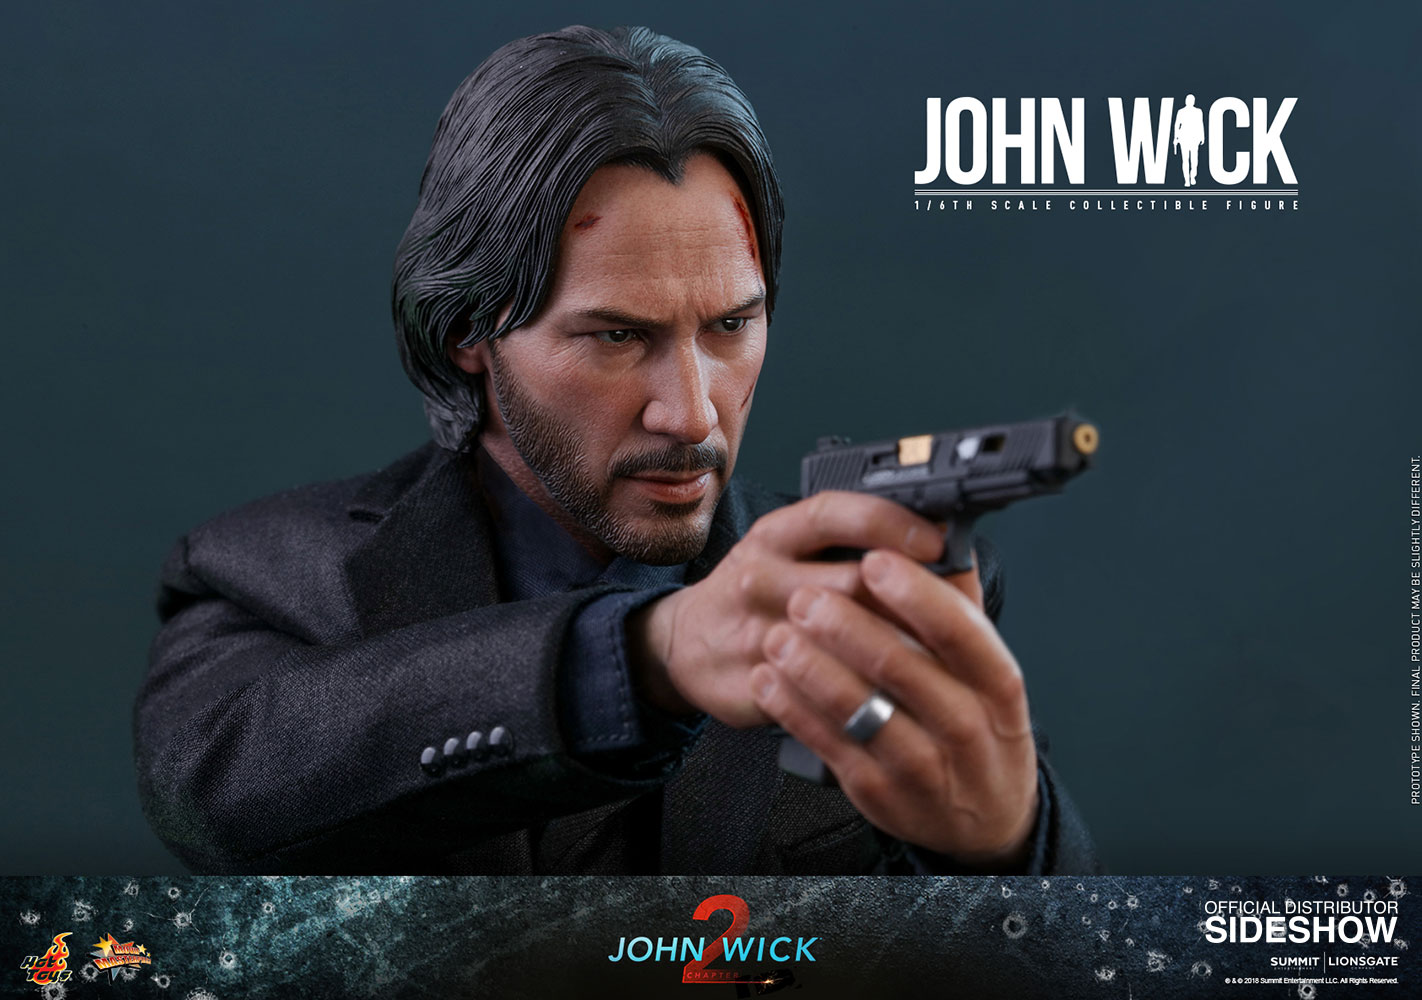 John Wick 1/6 Scale Figure by Hot Toys | Sideshow Collectibles
